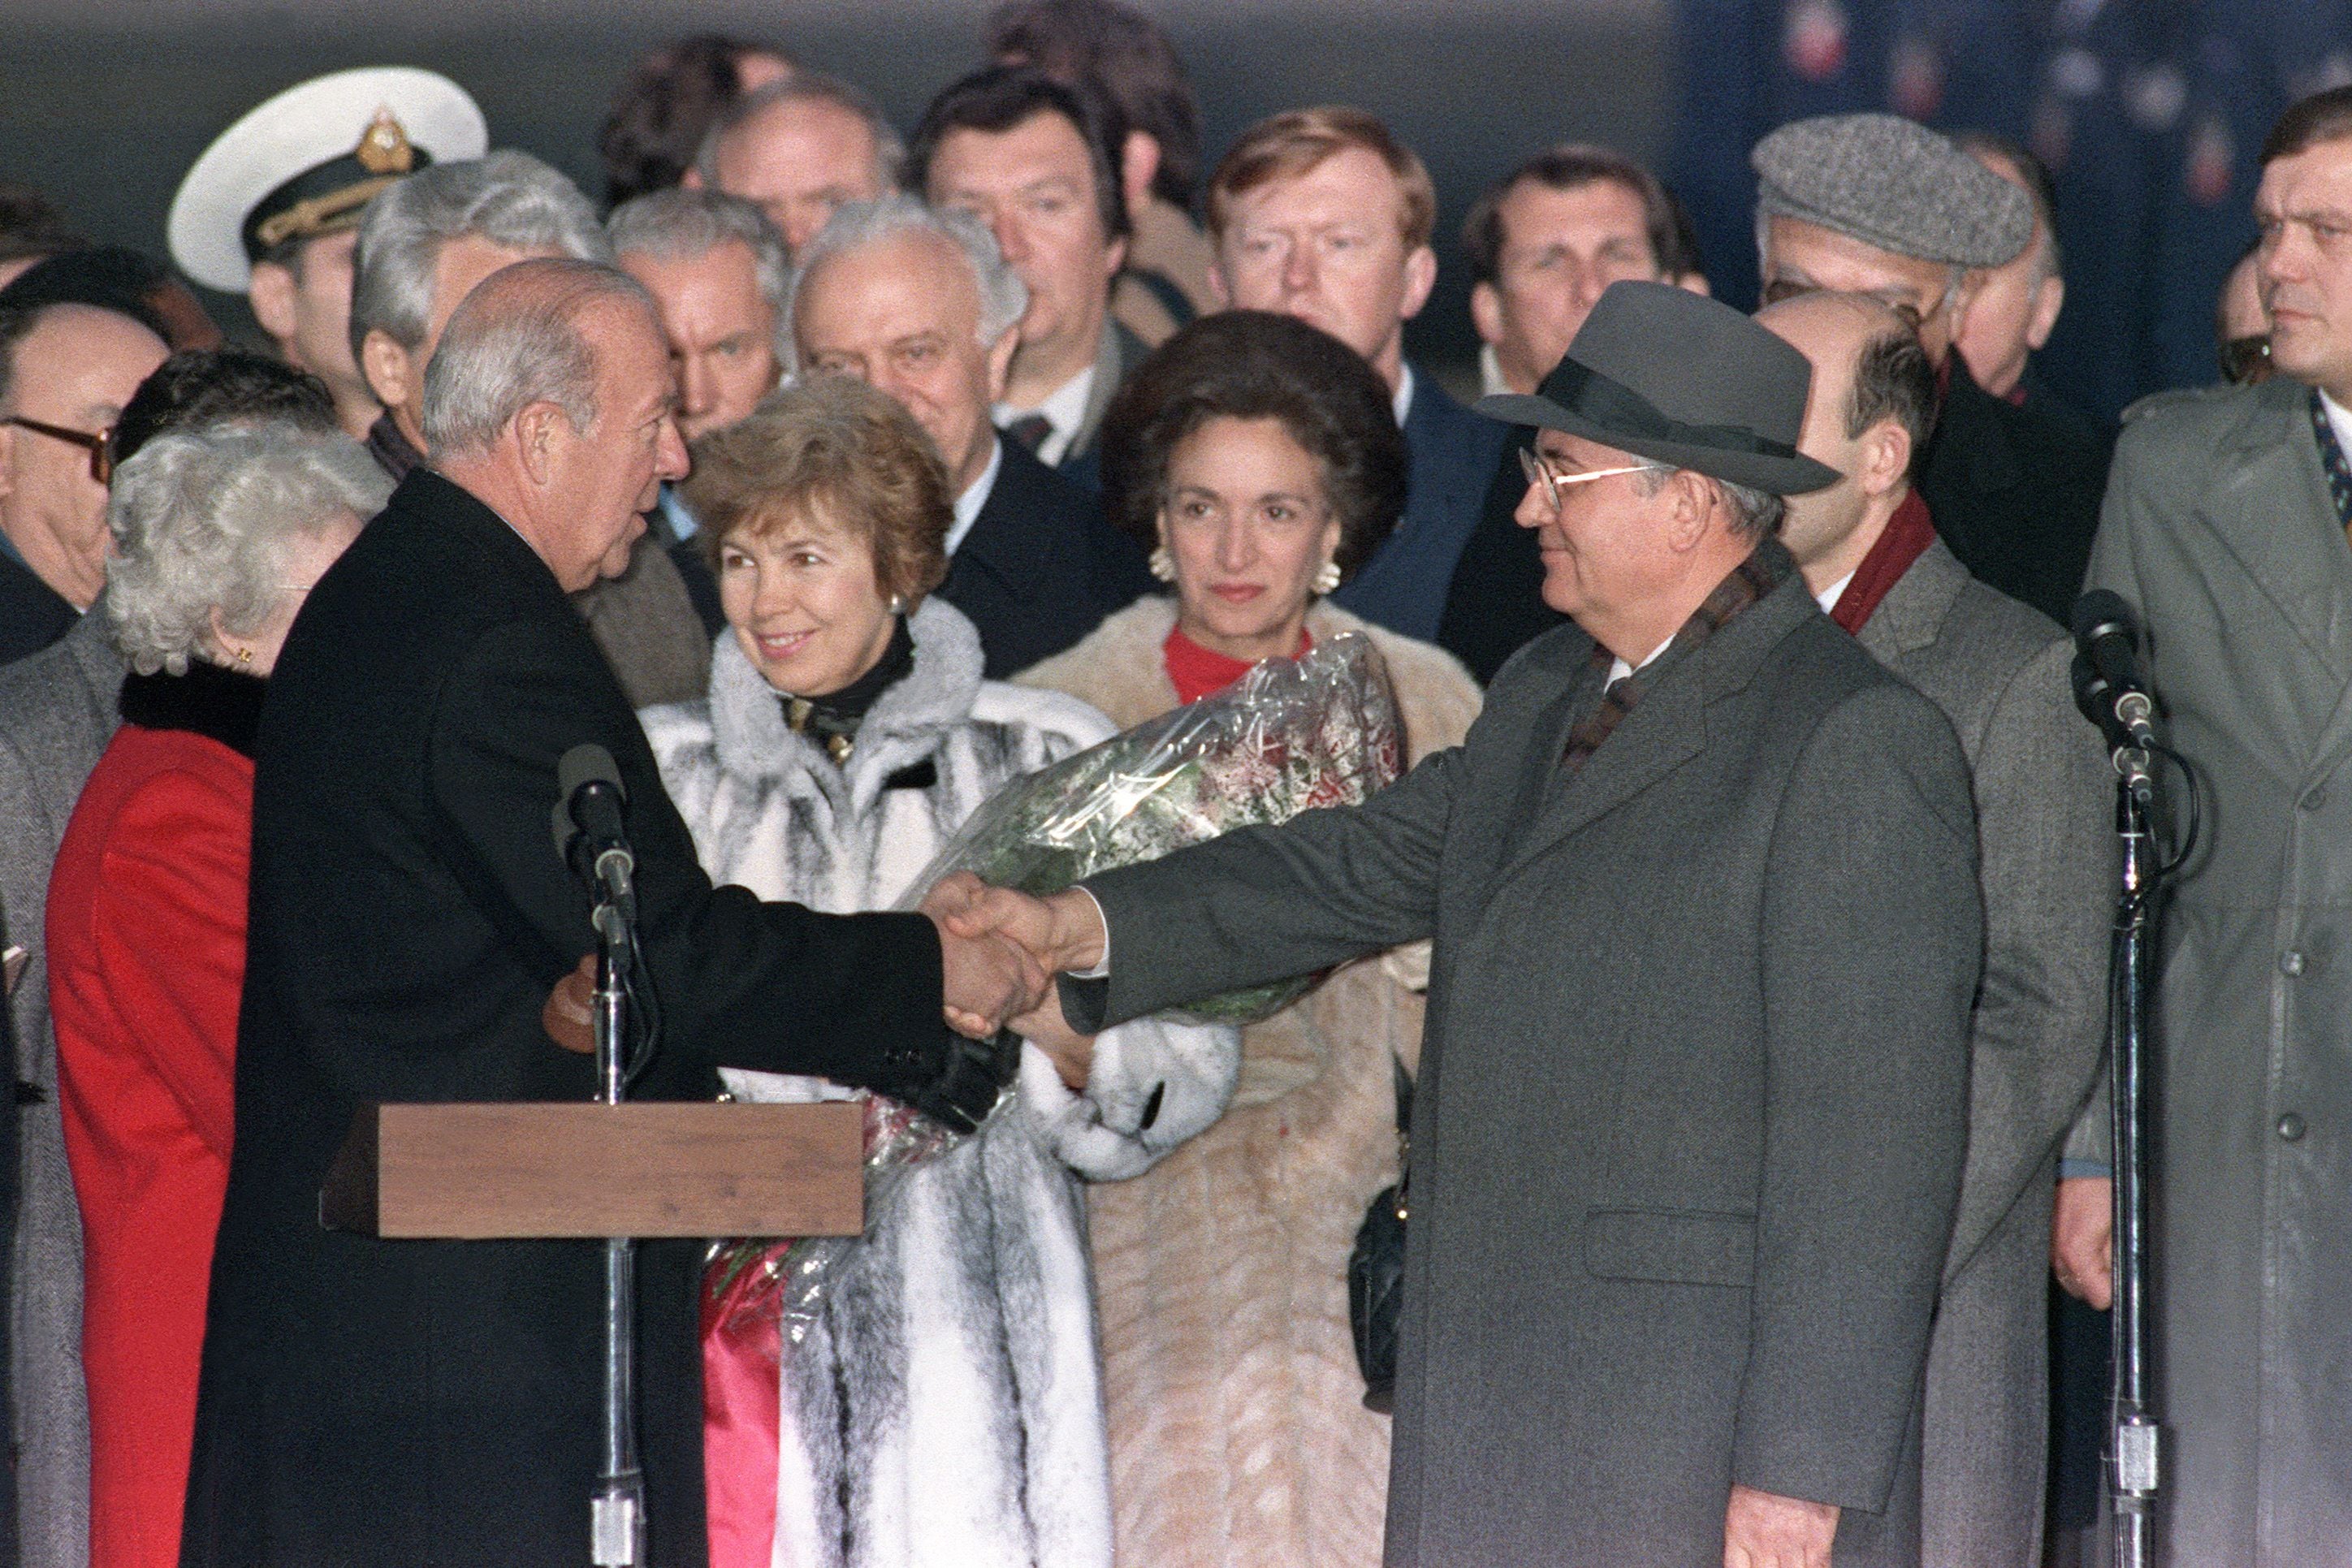 Shultz welcomes Gorbachev to the US in 1987